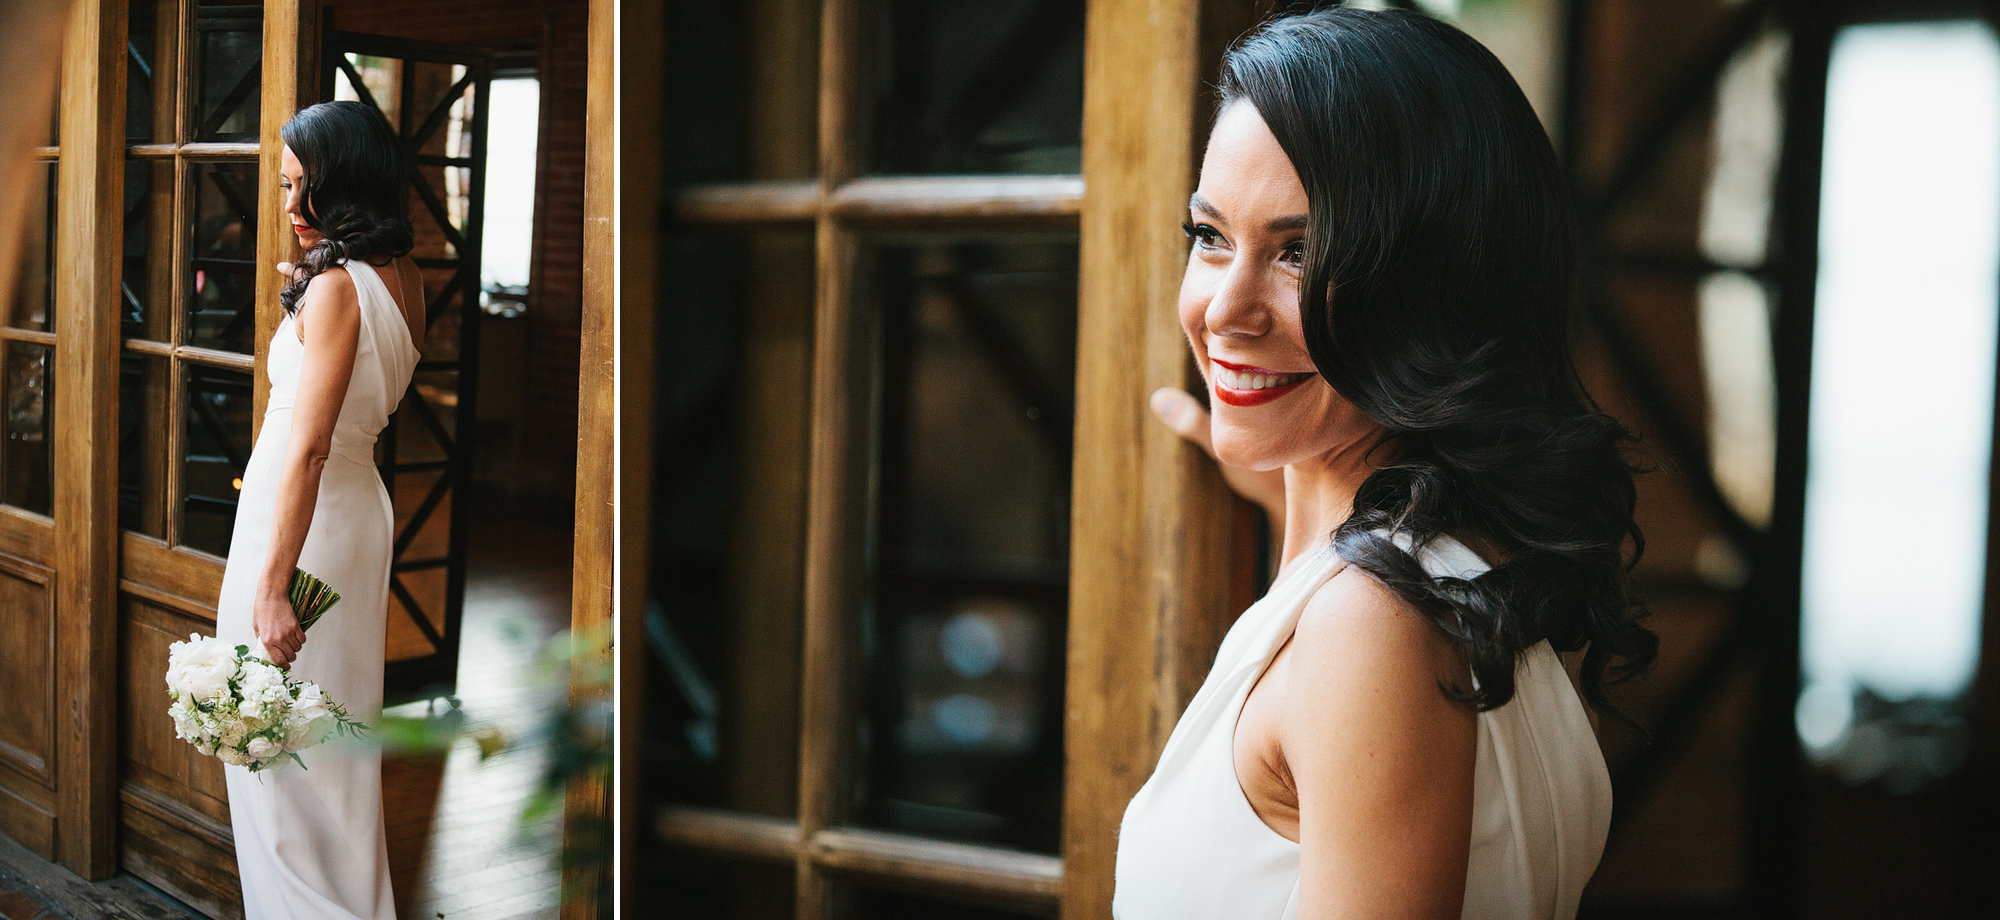 Bridal portraits by the wood door. 